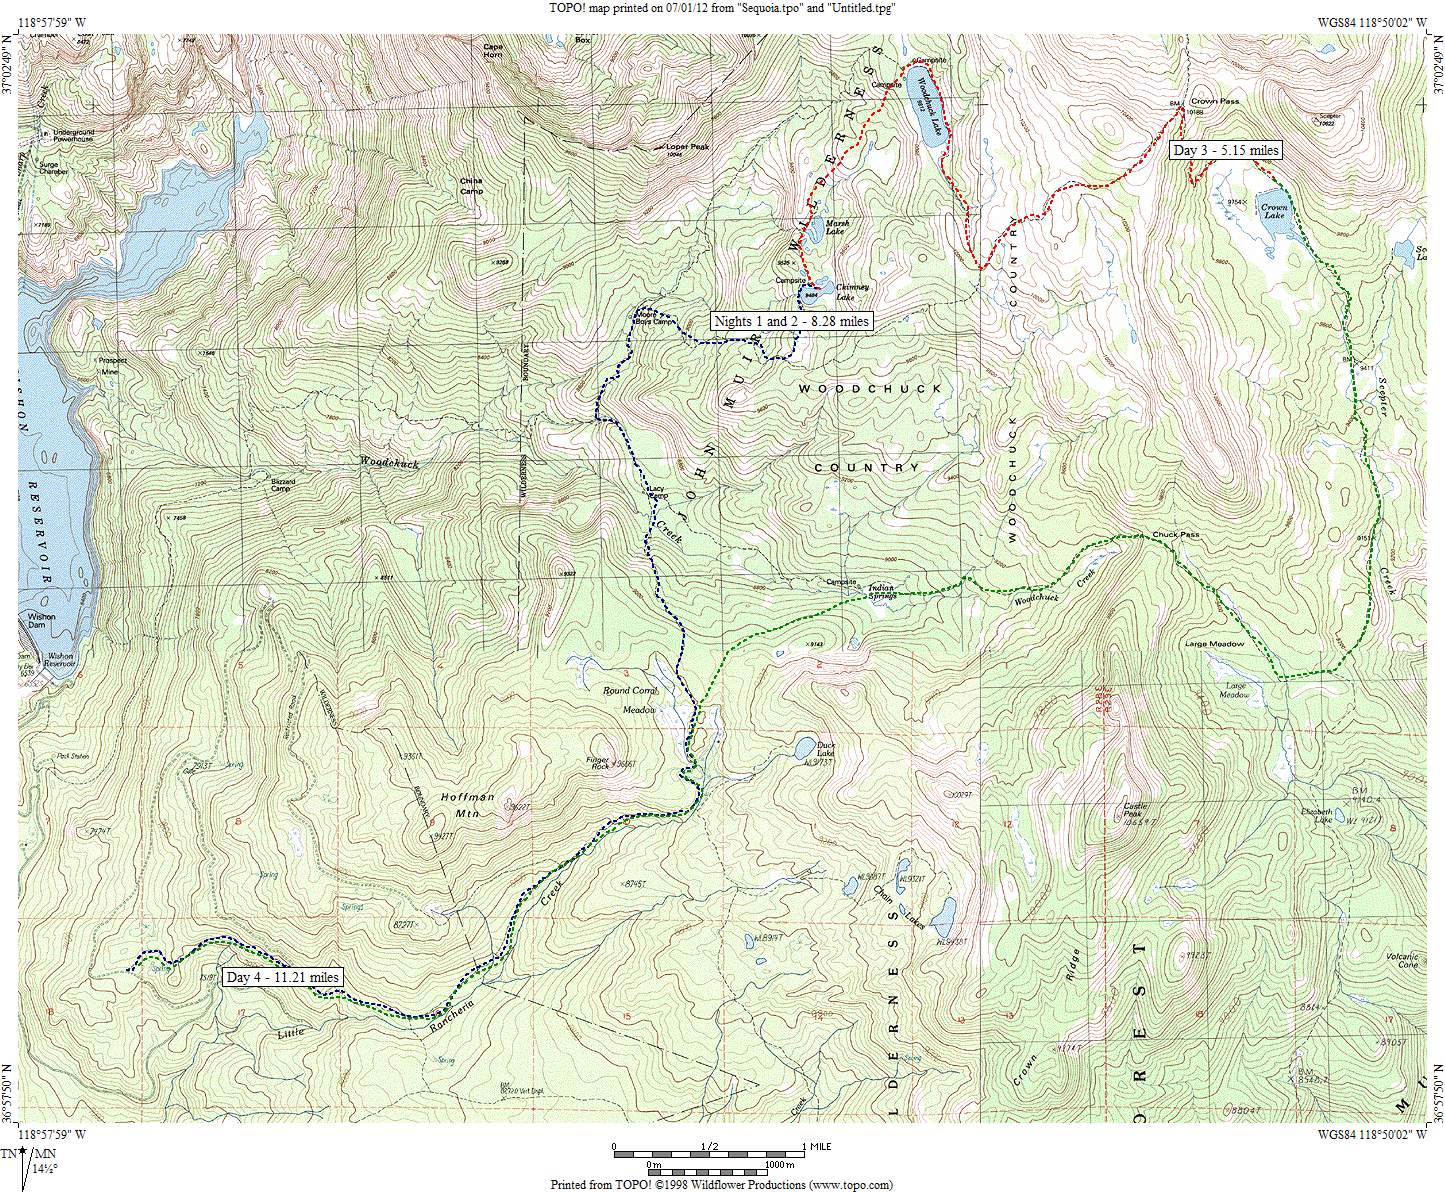 Woodchuck Country Map